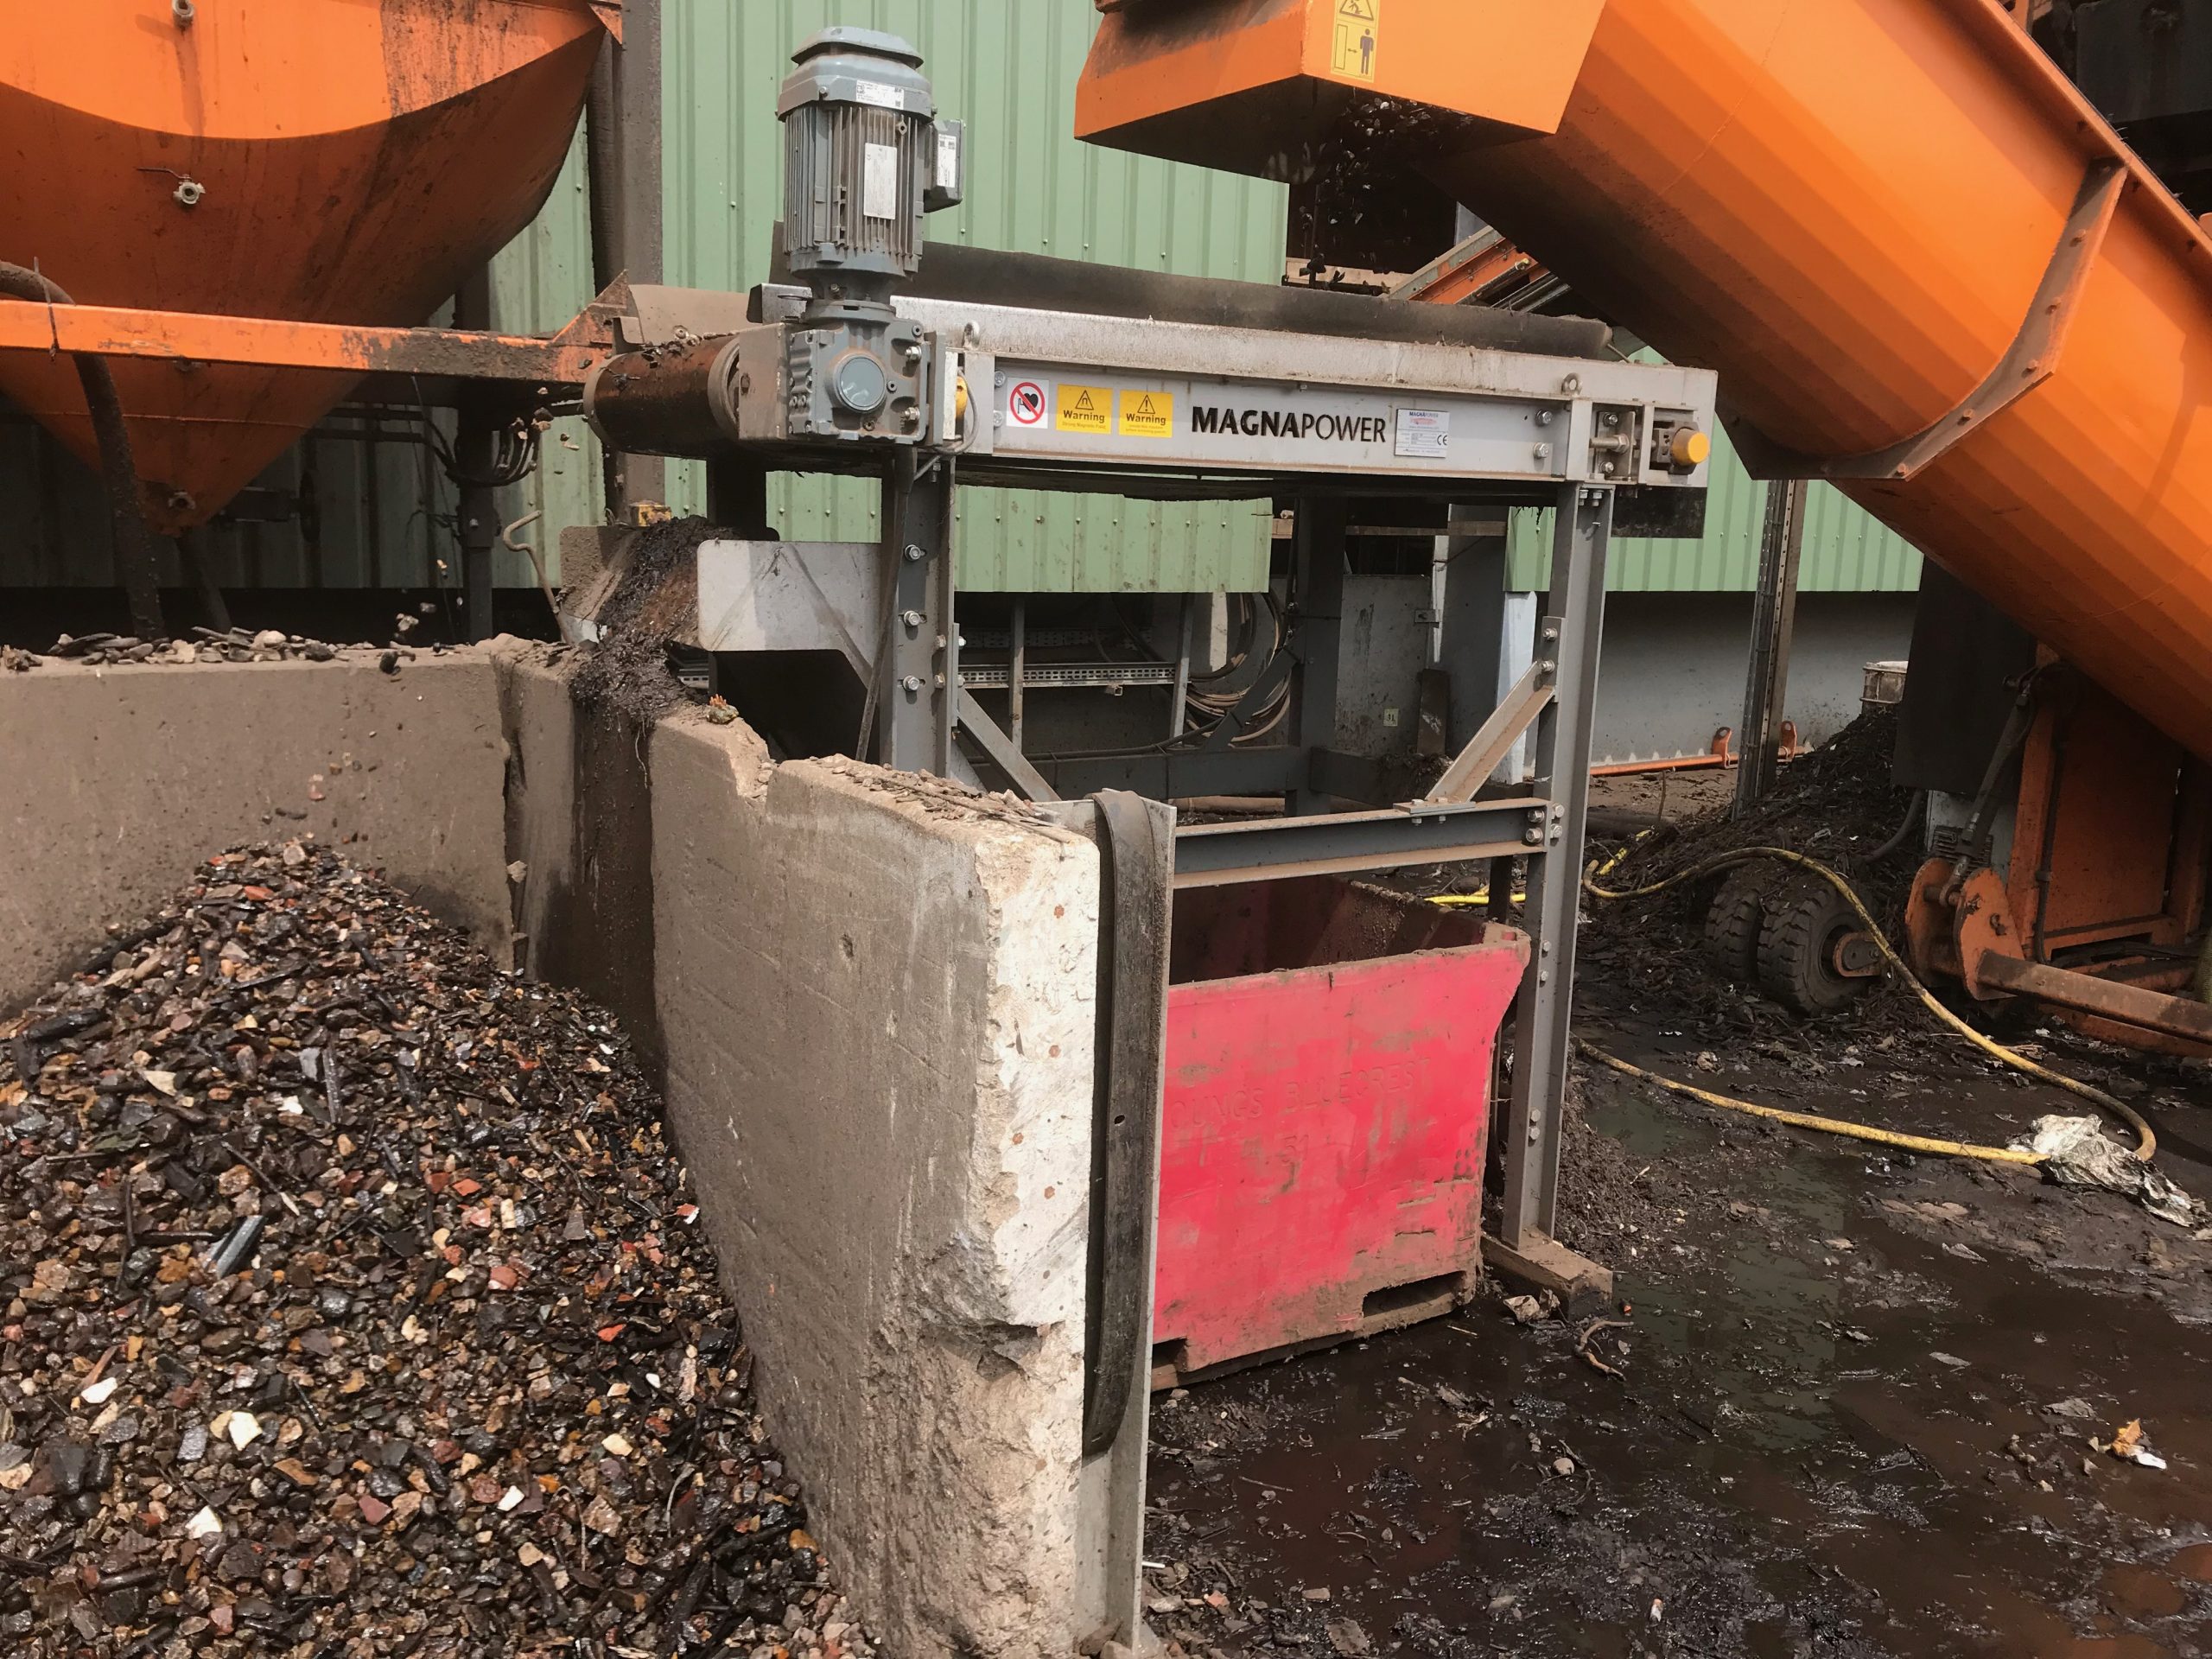 Magnetic head pulley sorting ferrous from stone